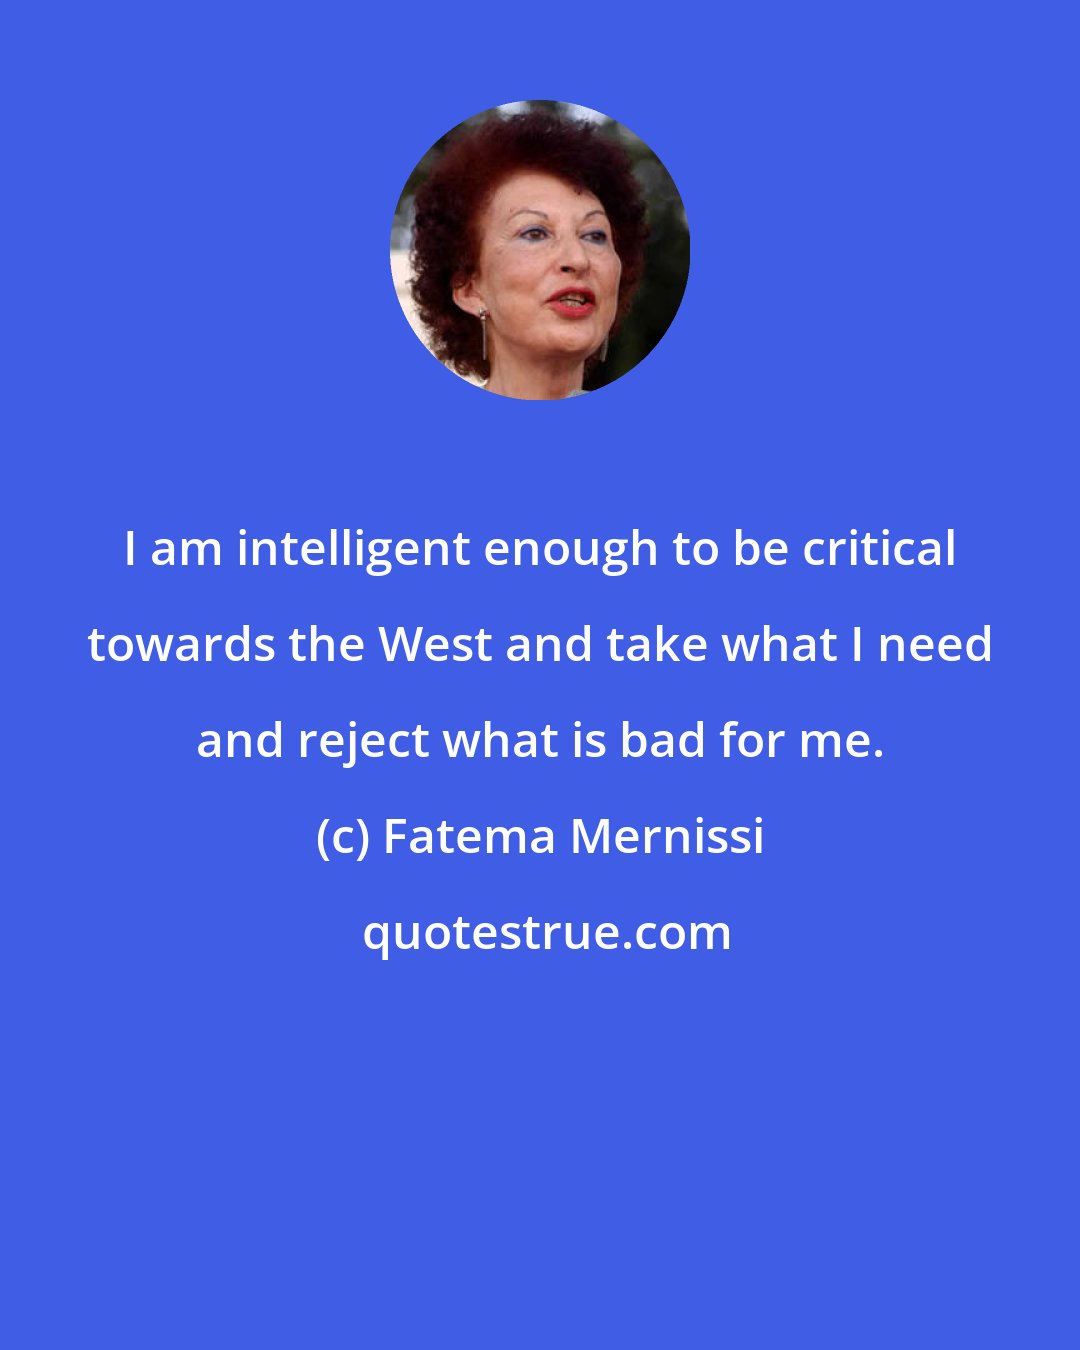 Fatema Mernissi: I am intelligent enough to be critical towards the West and take what I need and reject what is bad for me.